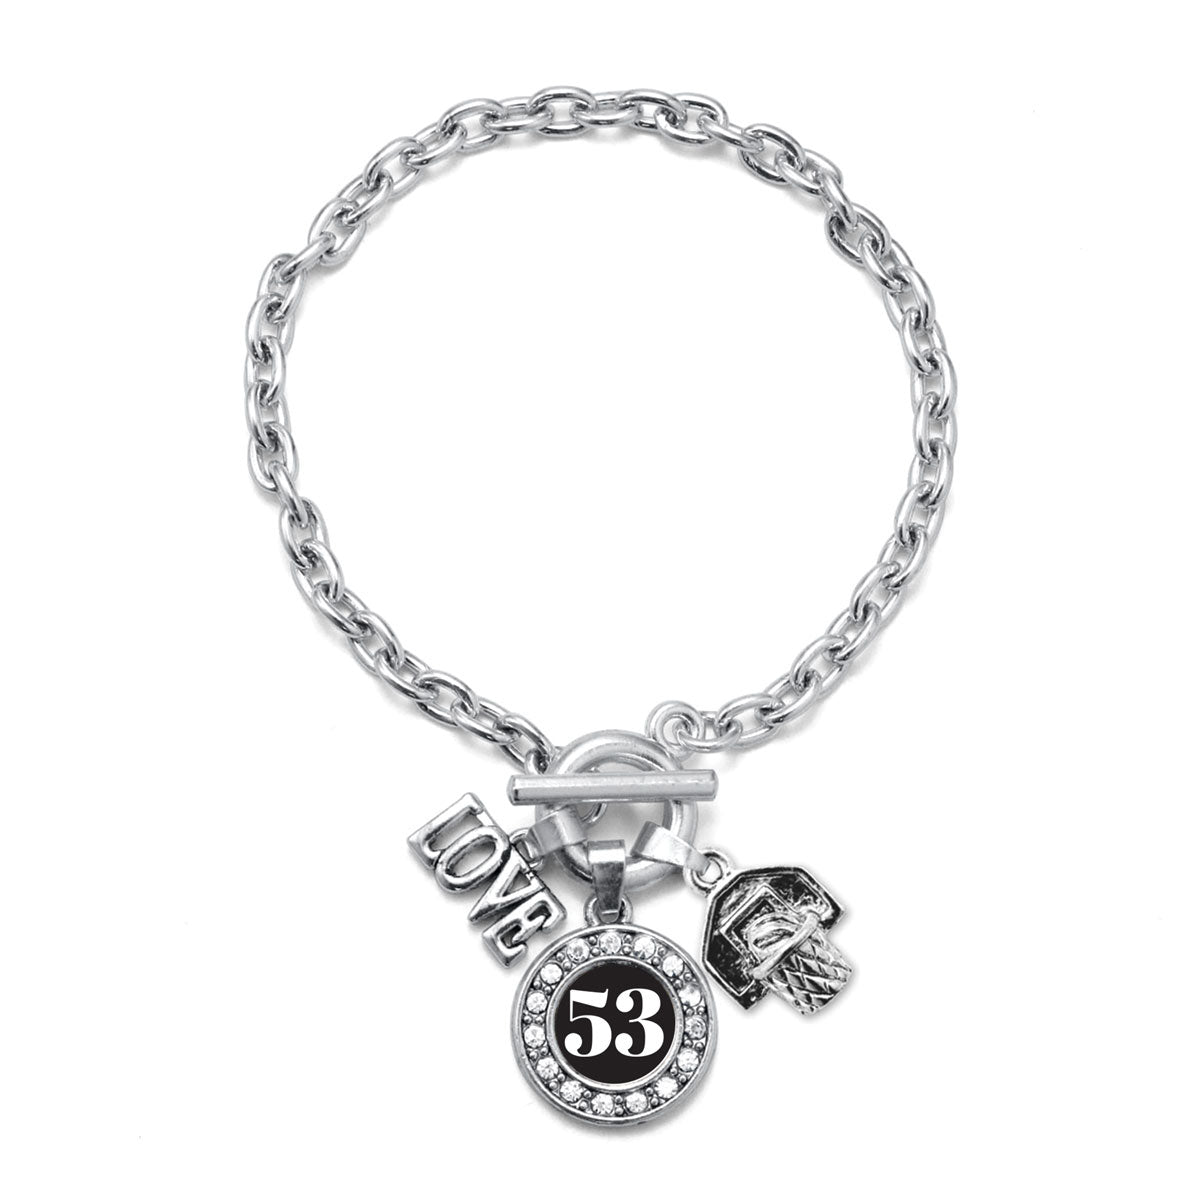 Silver Basketball Hoop - Sports Number 53 Circle Charm Toggle Bracelet